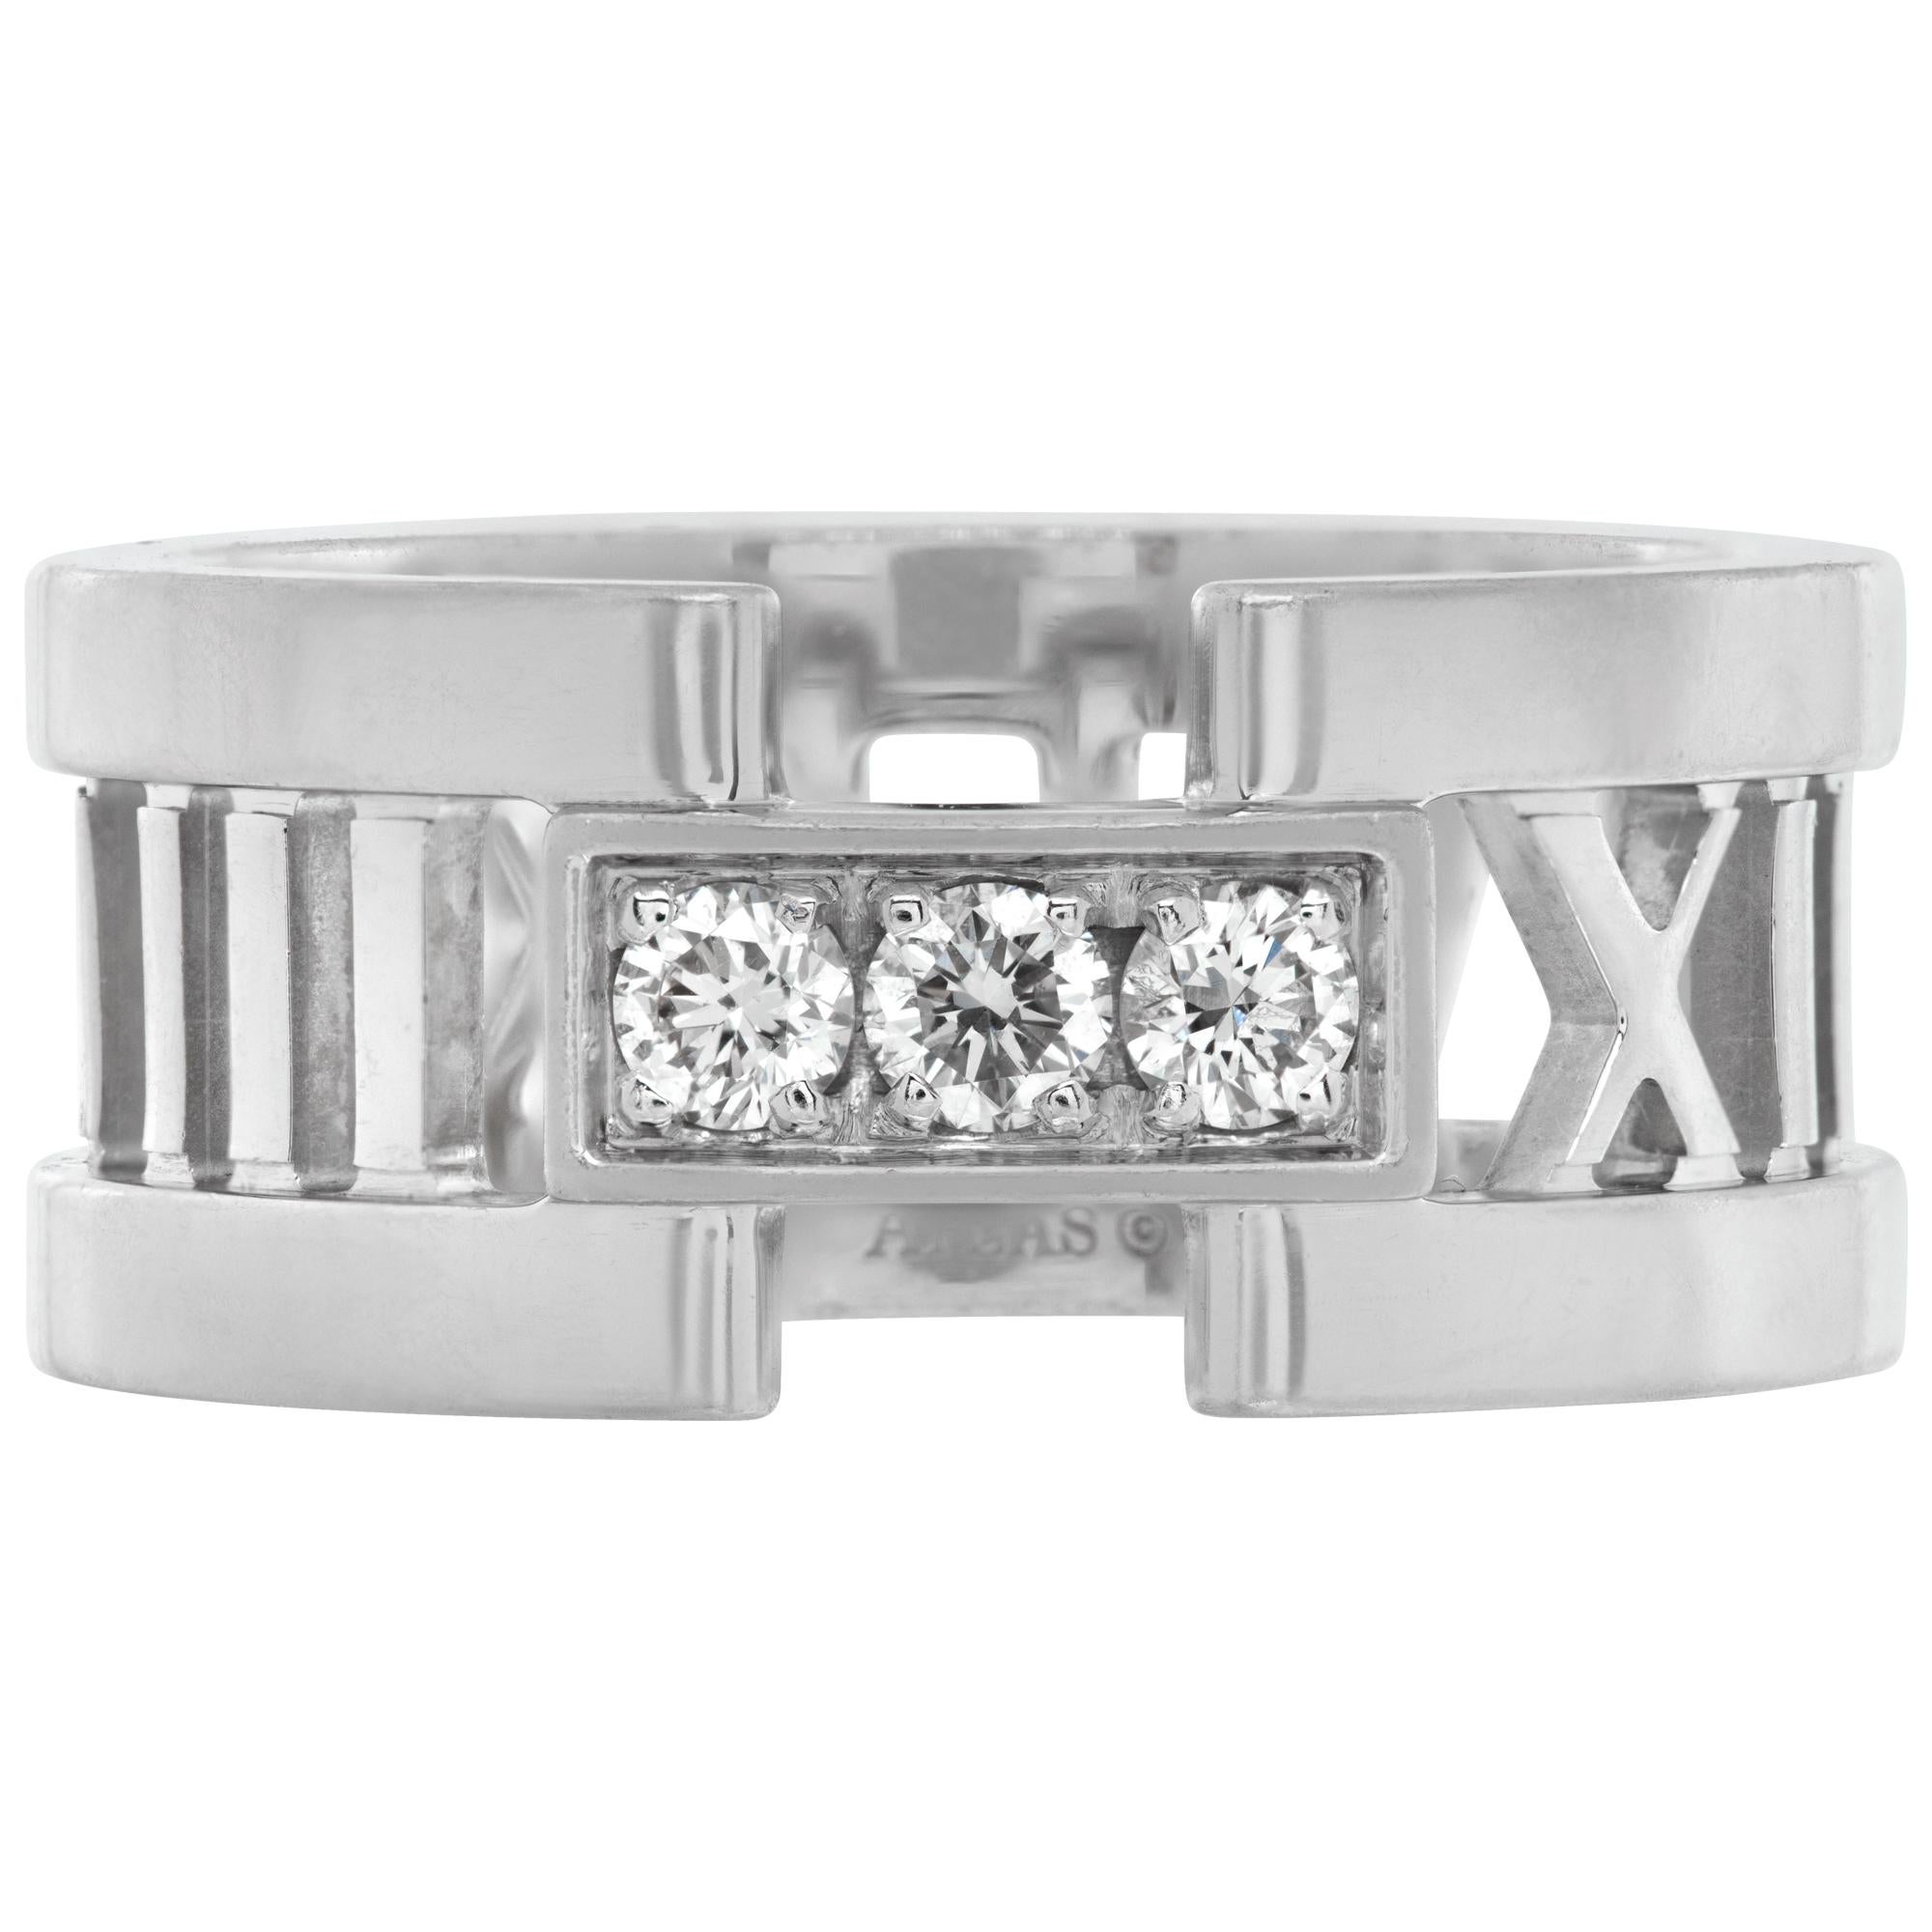 Tiffany & Co. Atlas 3 diamond ring in 18k white gold with 0.19 carats in E-F color, VVS-VS clarity round brilliant cut diamonds. Size 5.5.This Tiffany & Co. ring is currently size 5.5 and some items can be sized up or down, please ask! It weighs 4.7